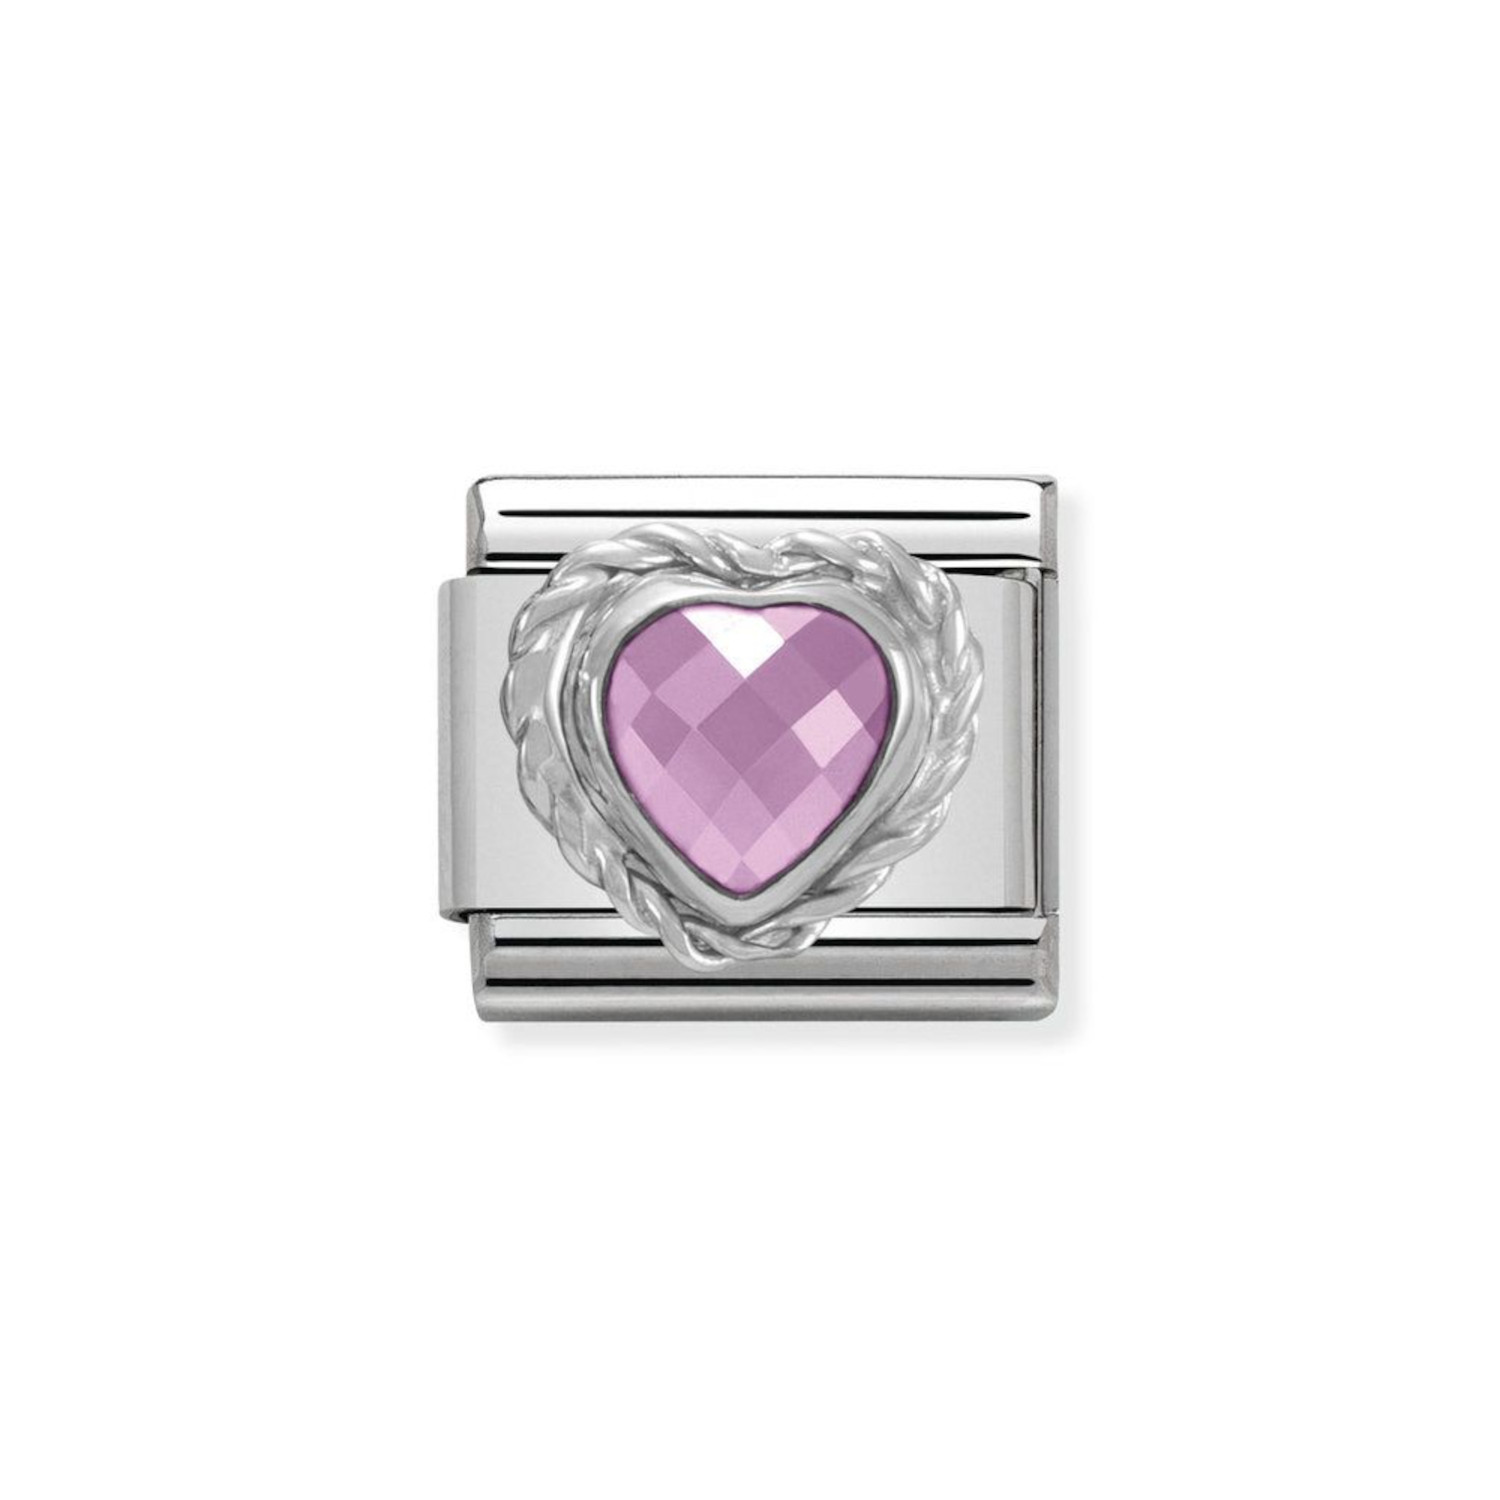 NOMINATION COMPOSABLE CLASSIC LINK IN STERLING SILVER WITH HEART-SHAPED FACETED PINK STONE 330603/003